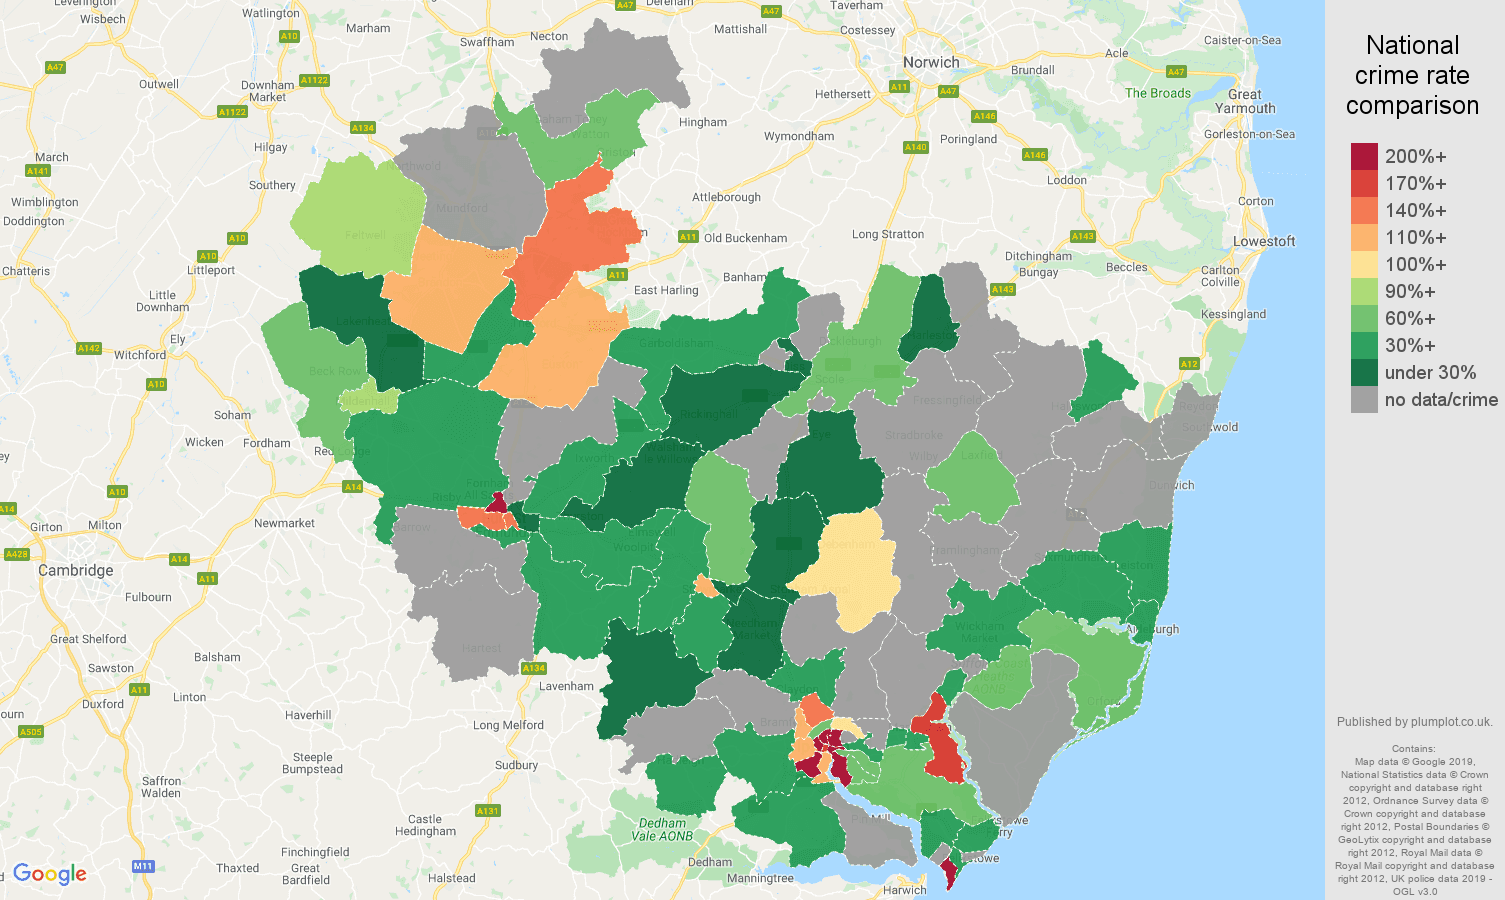 Ipswich possession of weapons crime rate comparison map